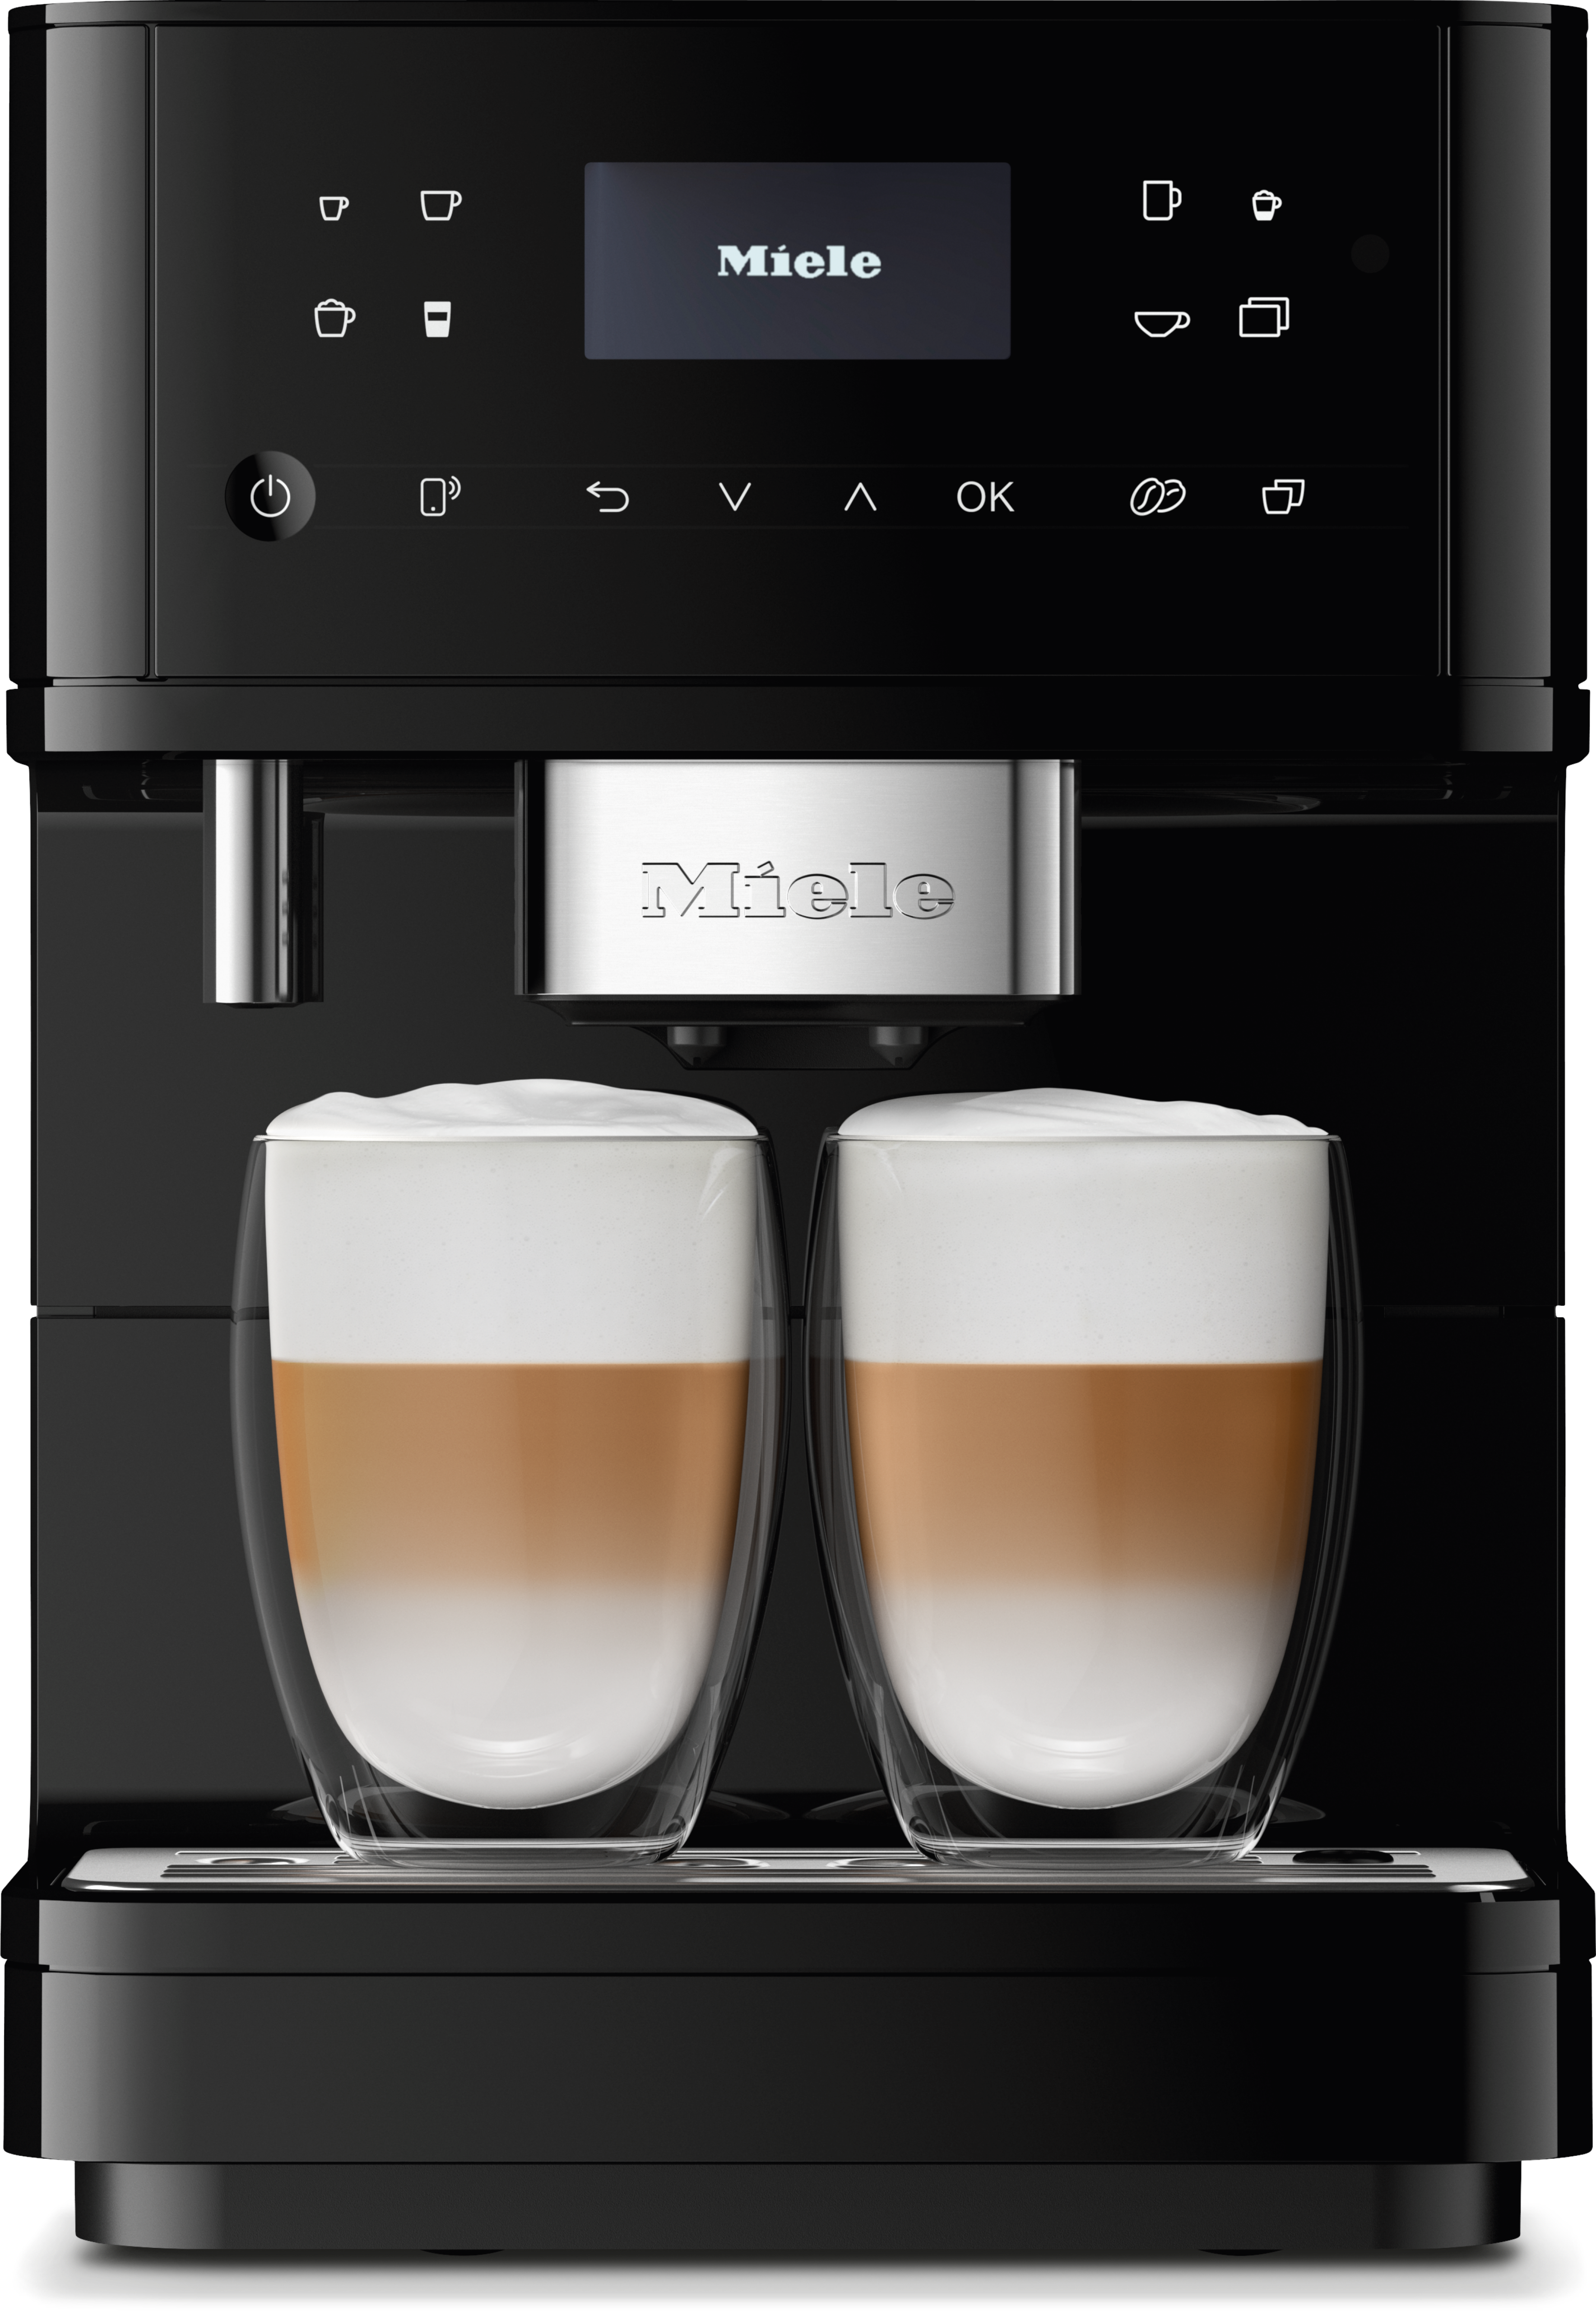 CM 6160 MilkPerfectionCountertop coffee machine With WiFiConn@ct and a wide selection of speciality coffees for maximum freedom.